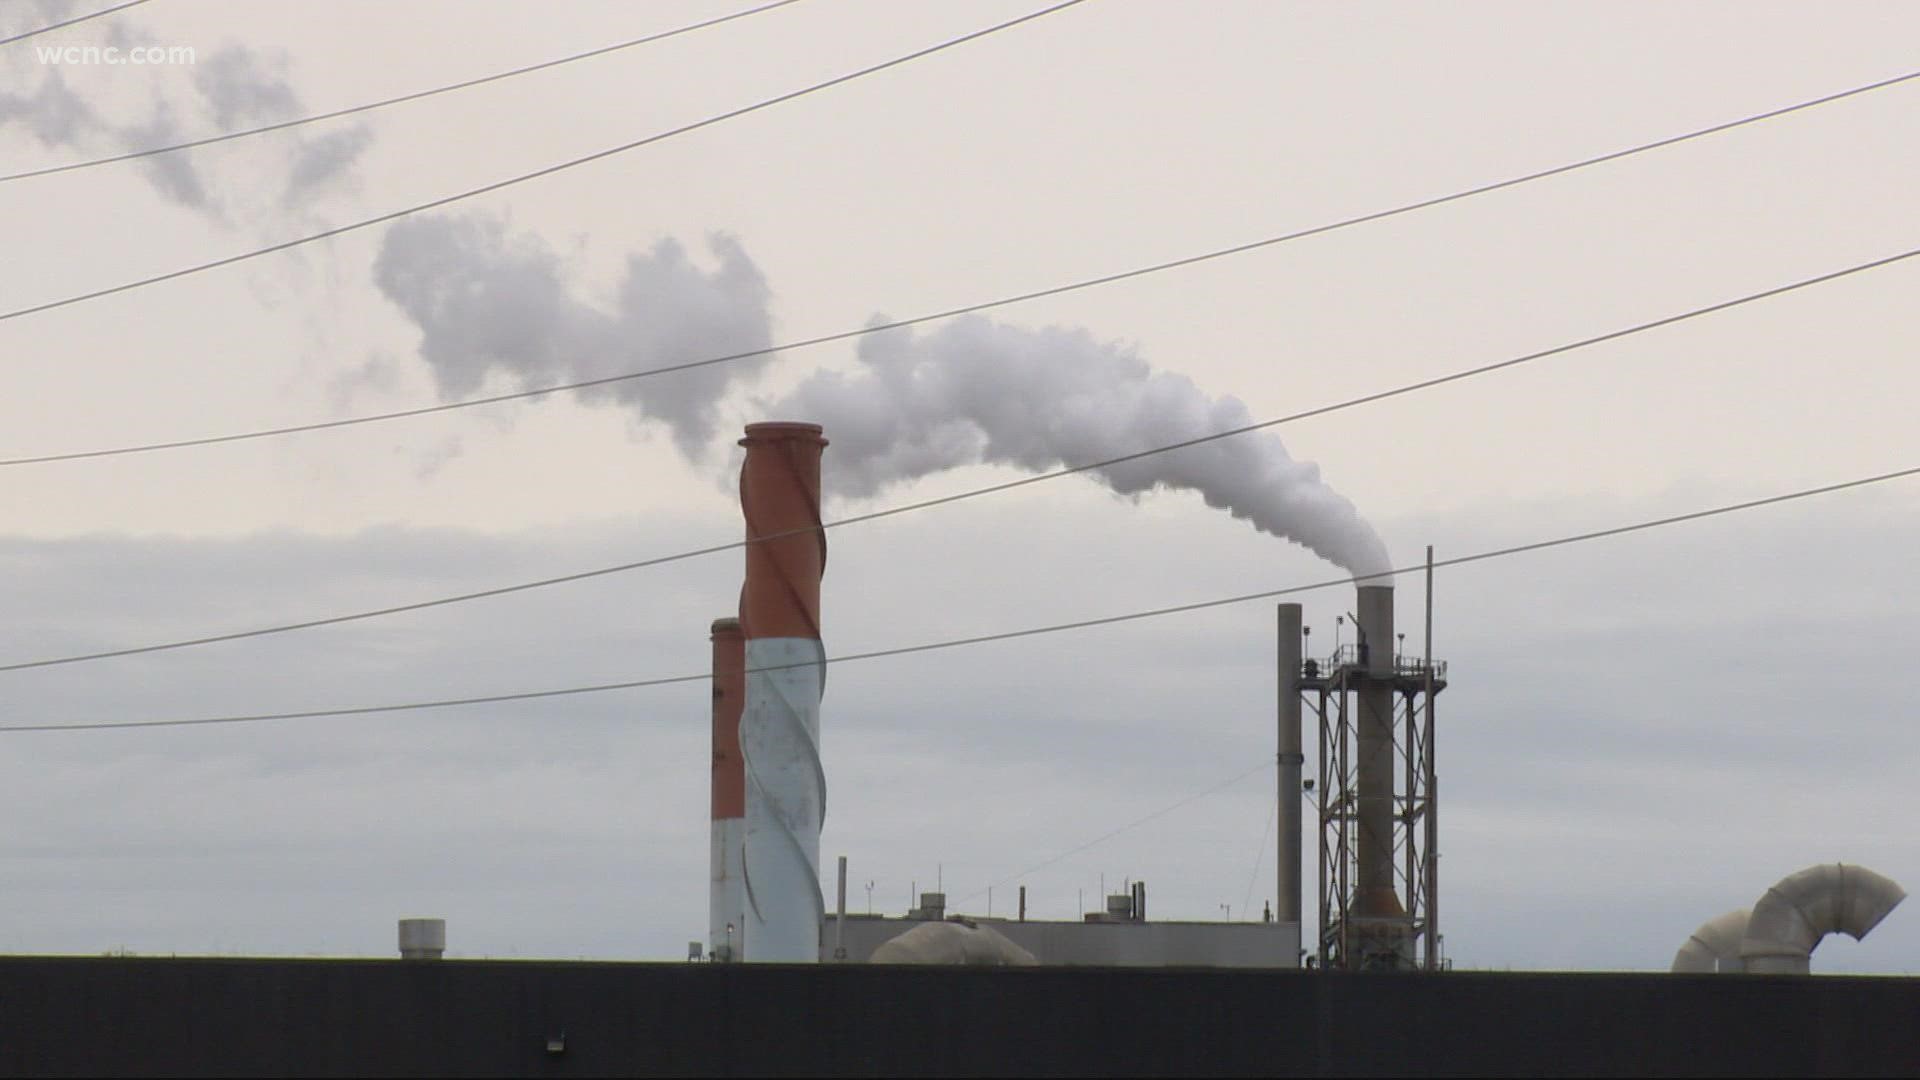 DHEC said in a statement that the EPA is in the process of gathering information about new reports of increased emissions at the paper mill.